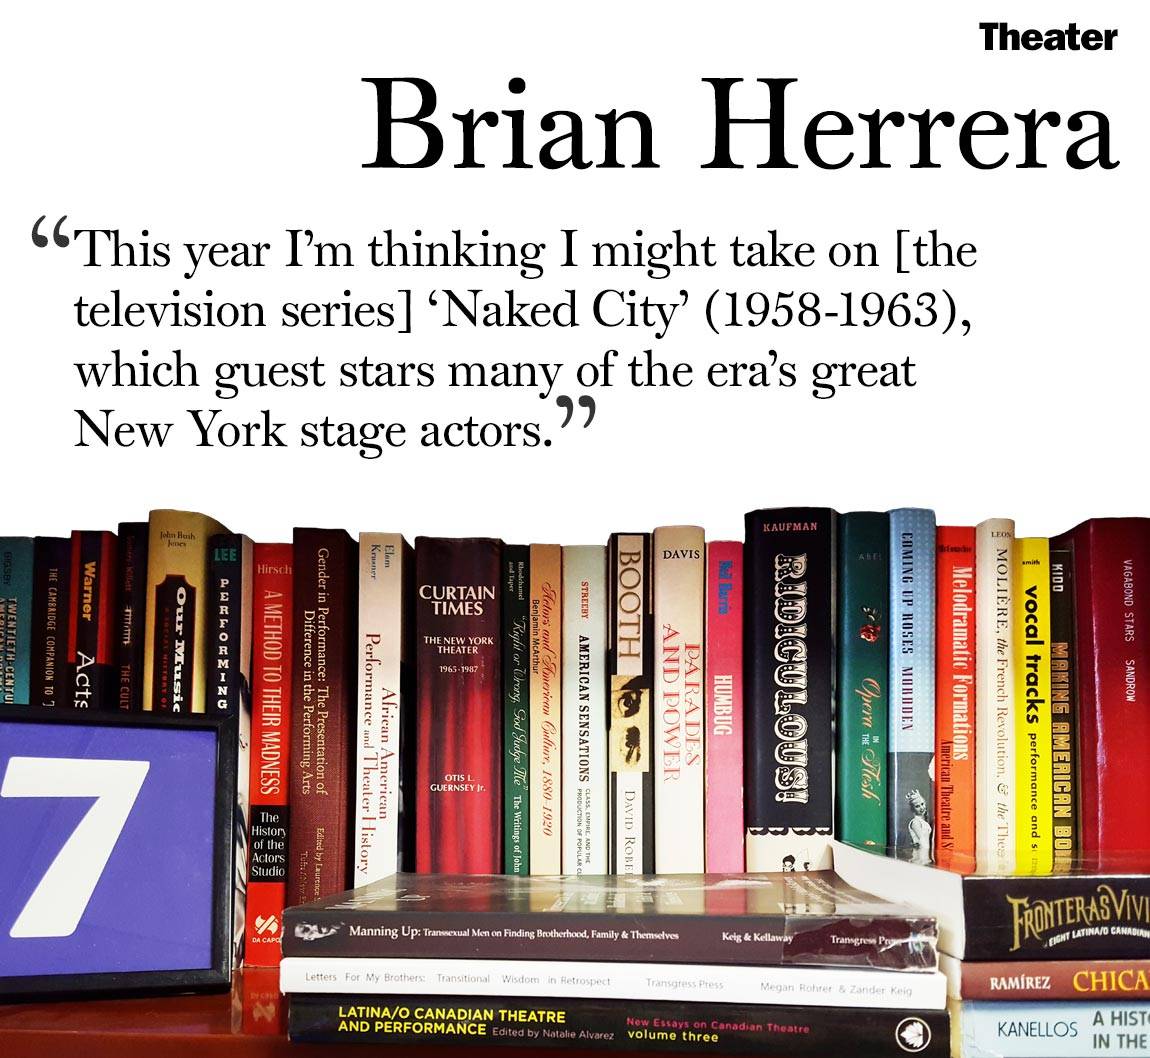 Faculty Bookshelves 2016 “Theater; Brian Herrera; ‘This year I’m thinking I might take on [the television series] ‘Naked City’ (1958-1963),  which guest stars many of the era’s great  New York stage actors.’”